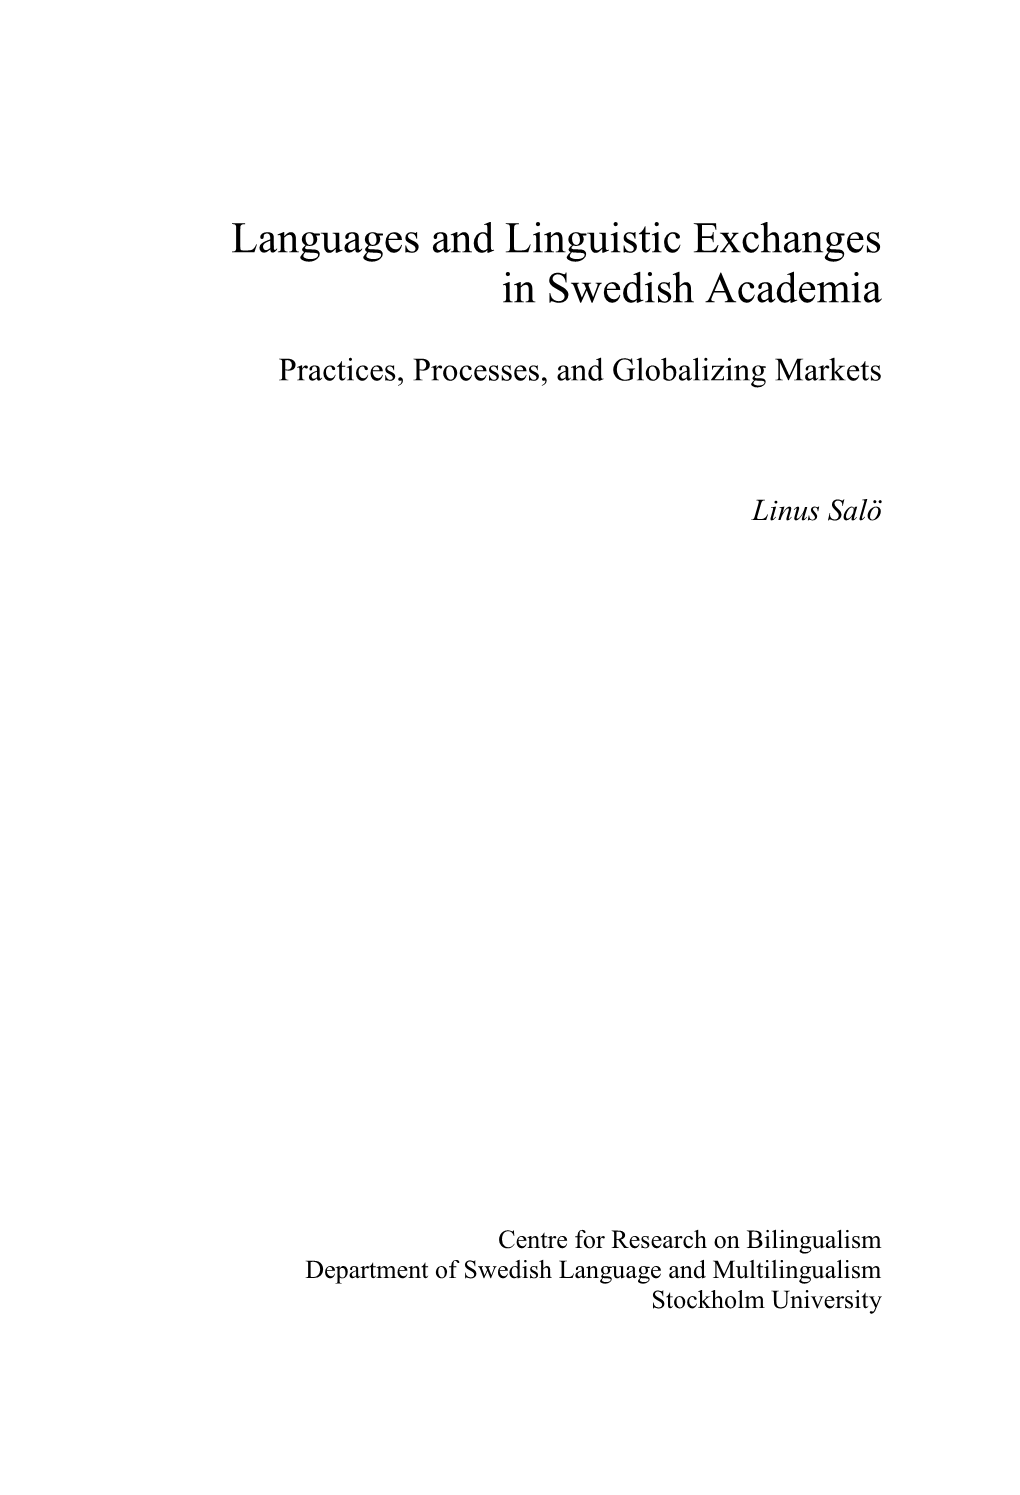 Languages and Linguistic Exchanges in Swedish Academia